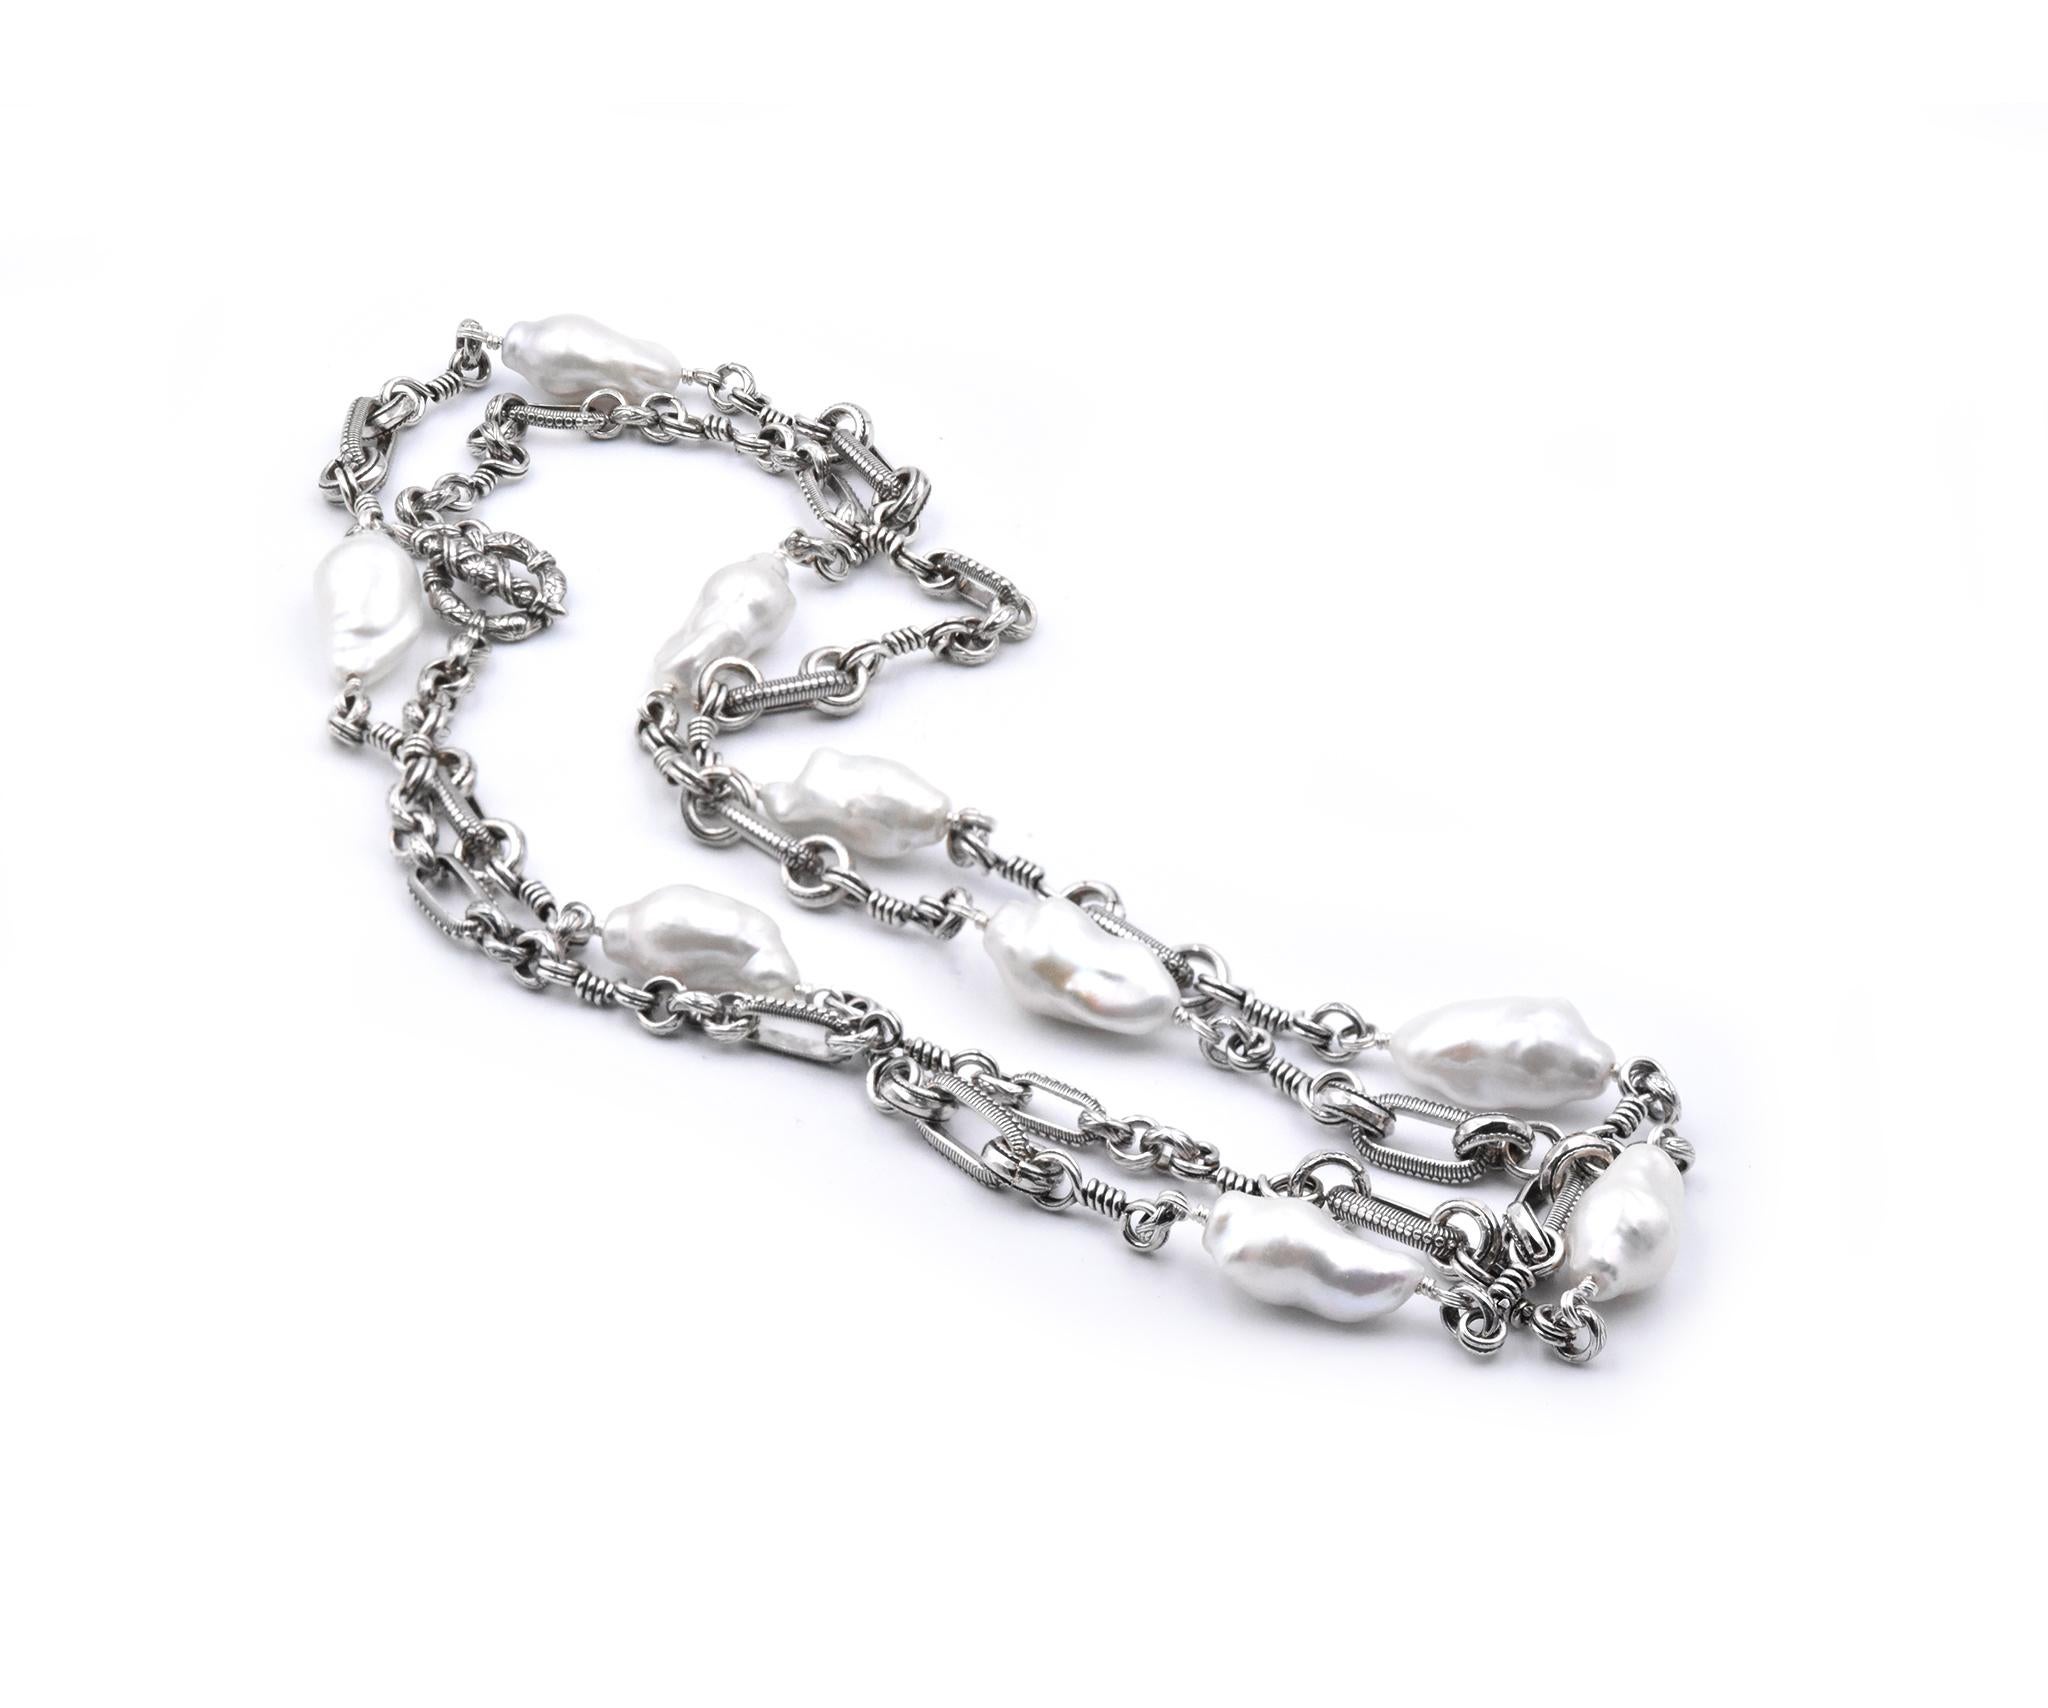 Designer: Stephen Dweck
Material: Sterling Silver
Pearls: 9 baroque pearls
Dimensions: necklace measures 44-inches in length
Weight: 113.4 grams
